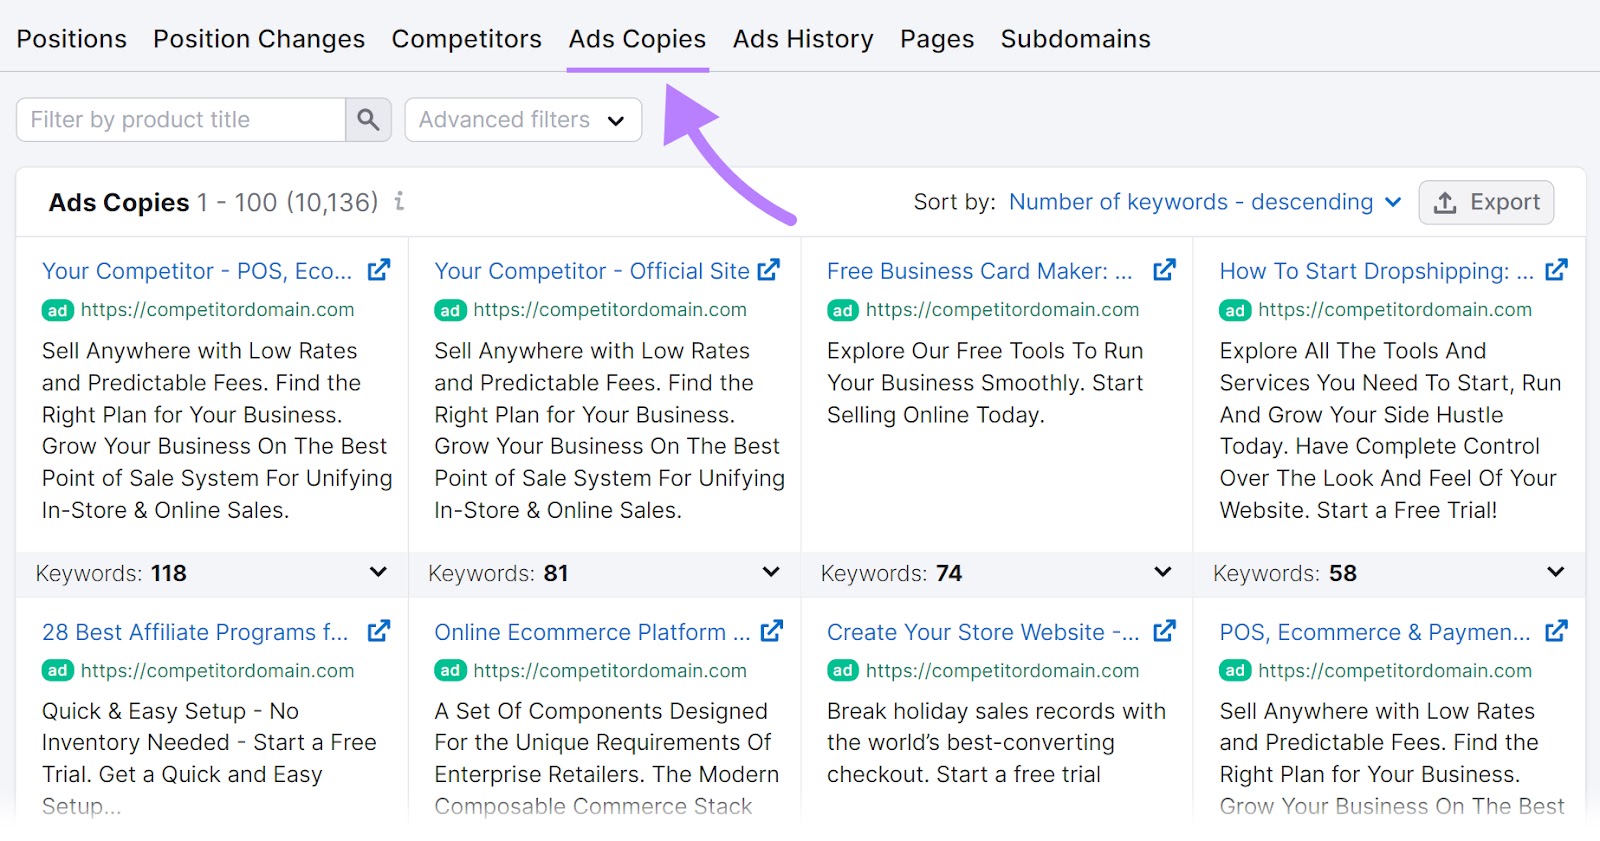 "Ad Copies" tab in Advertising Research